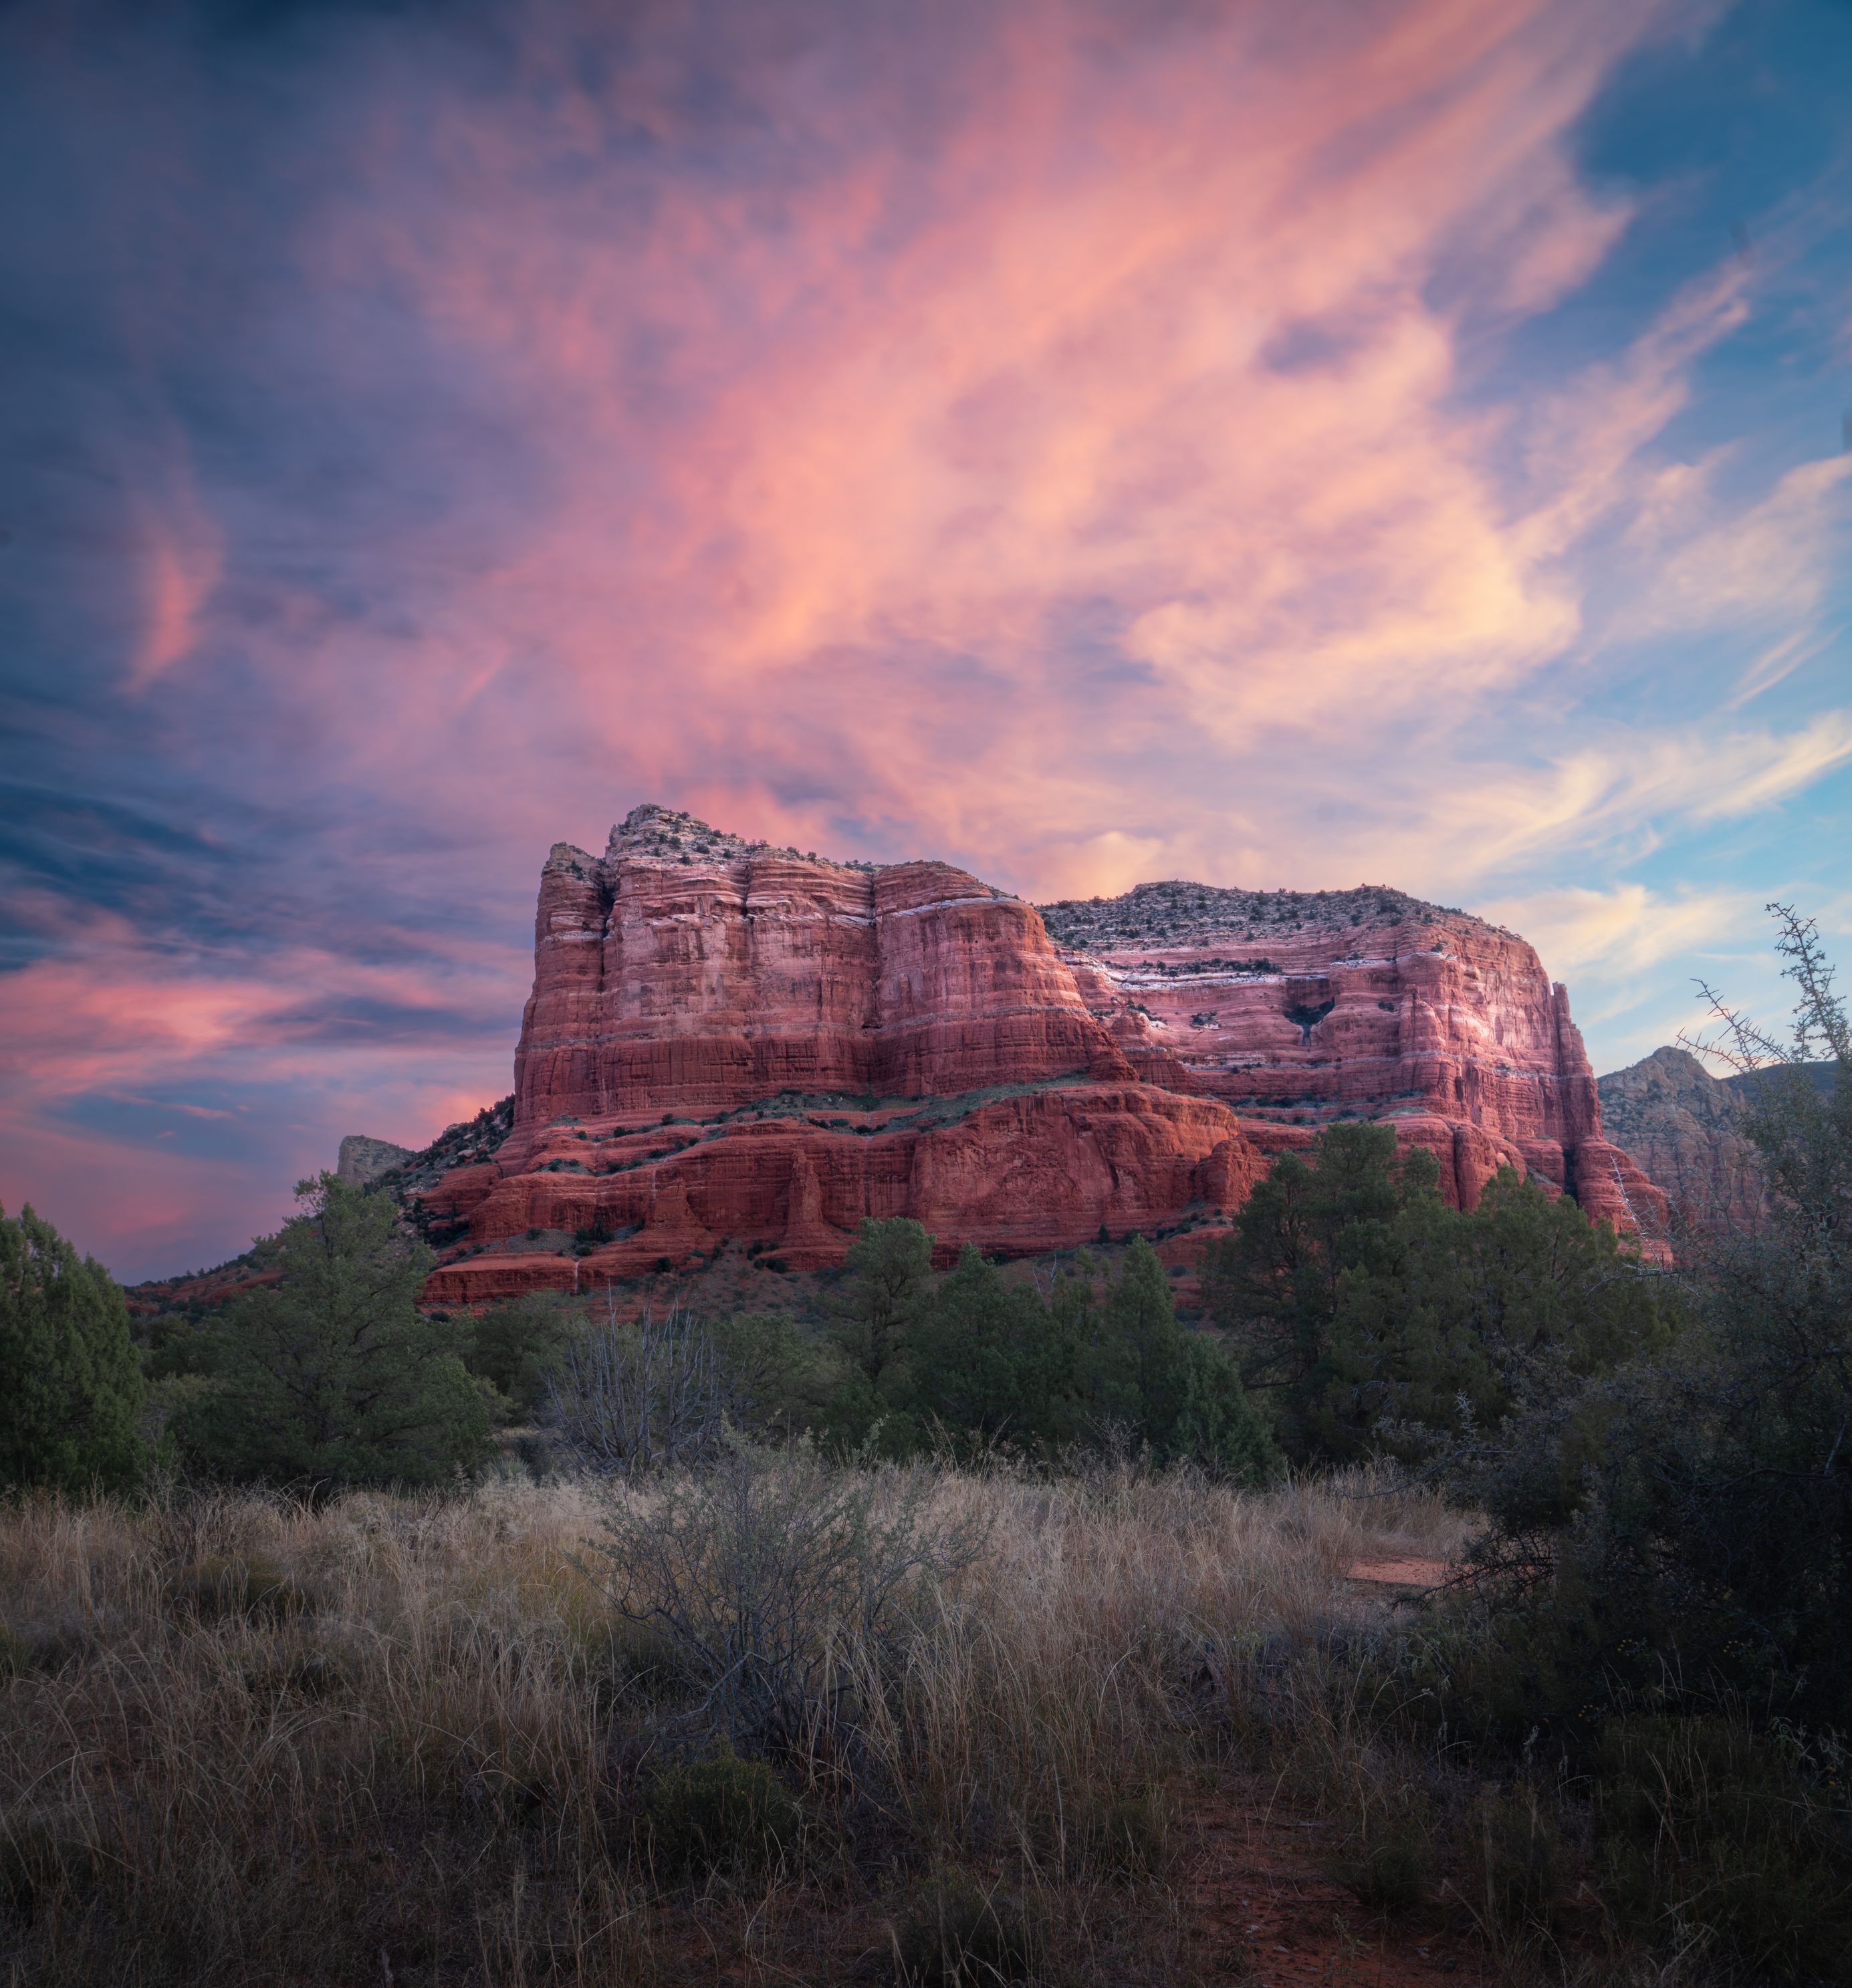 Morning at Courthouse Rock